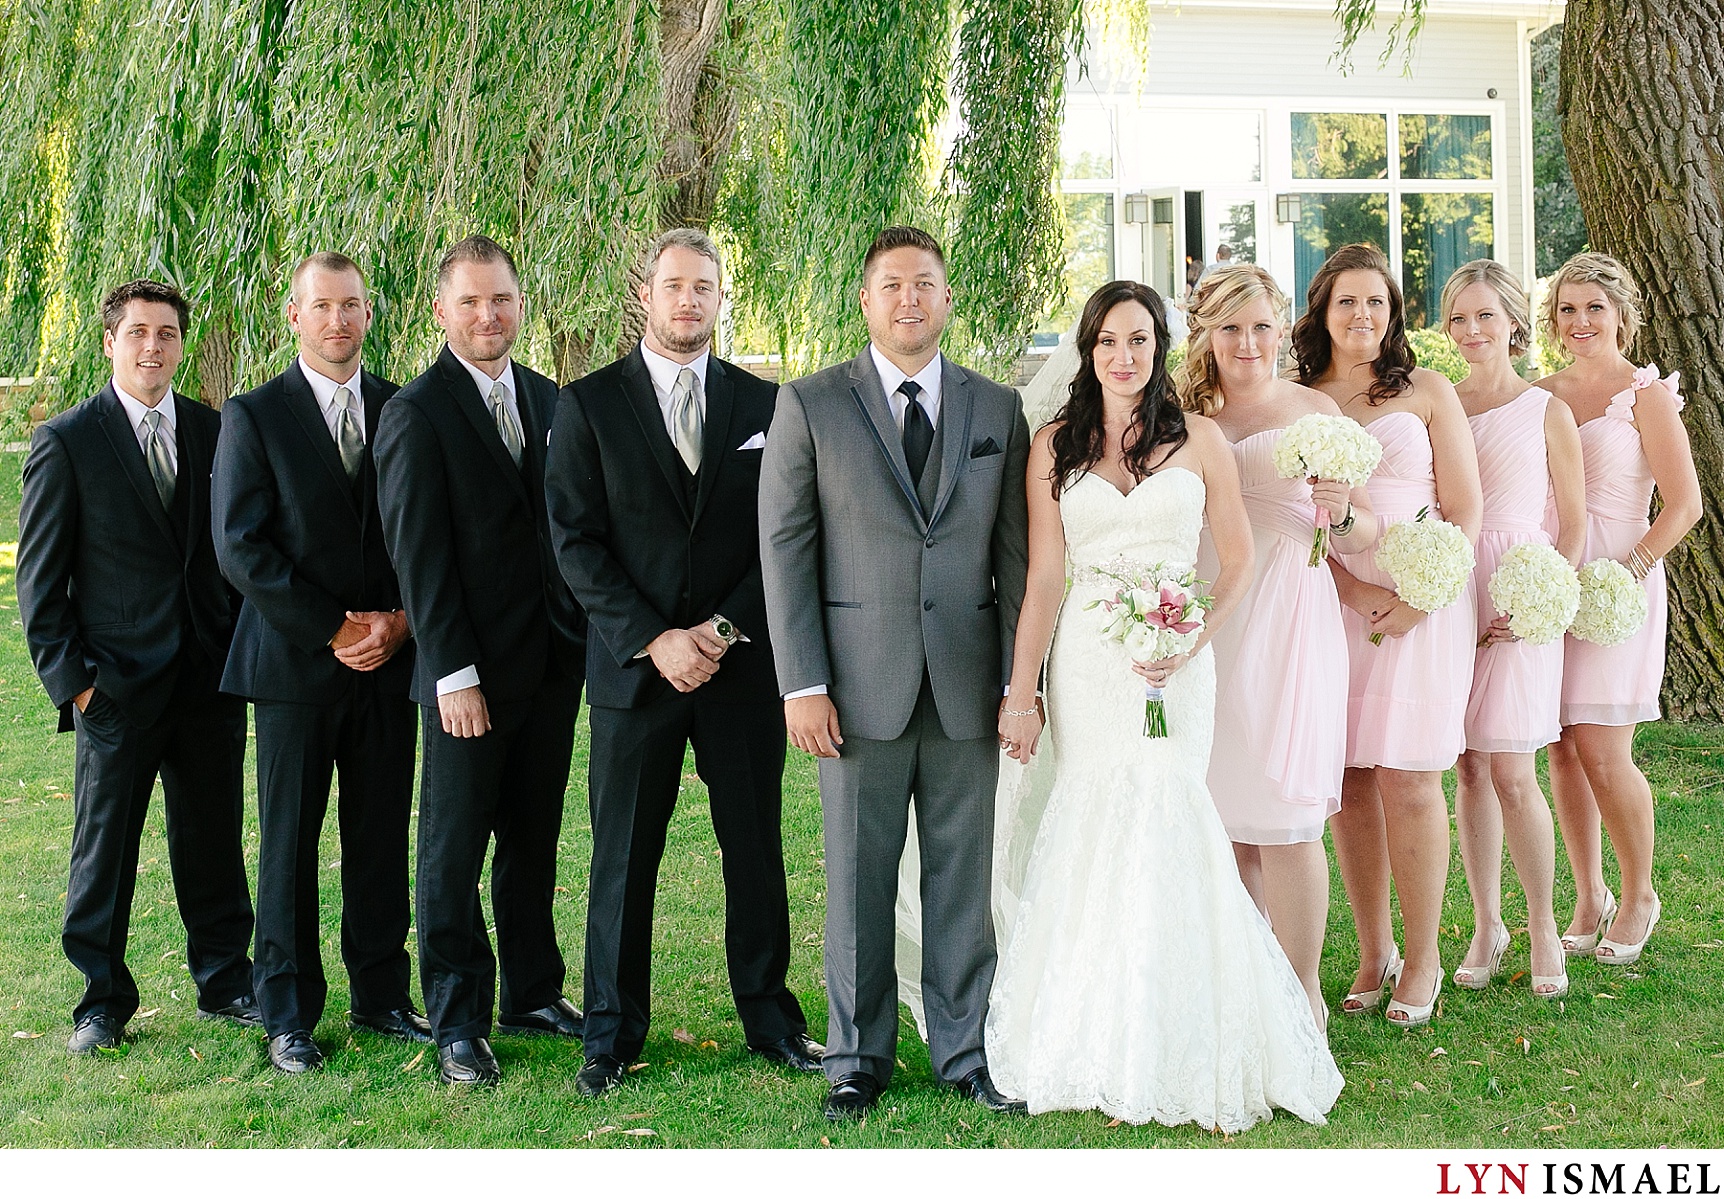 The wedding party under willow trees in Collingwood.